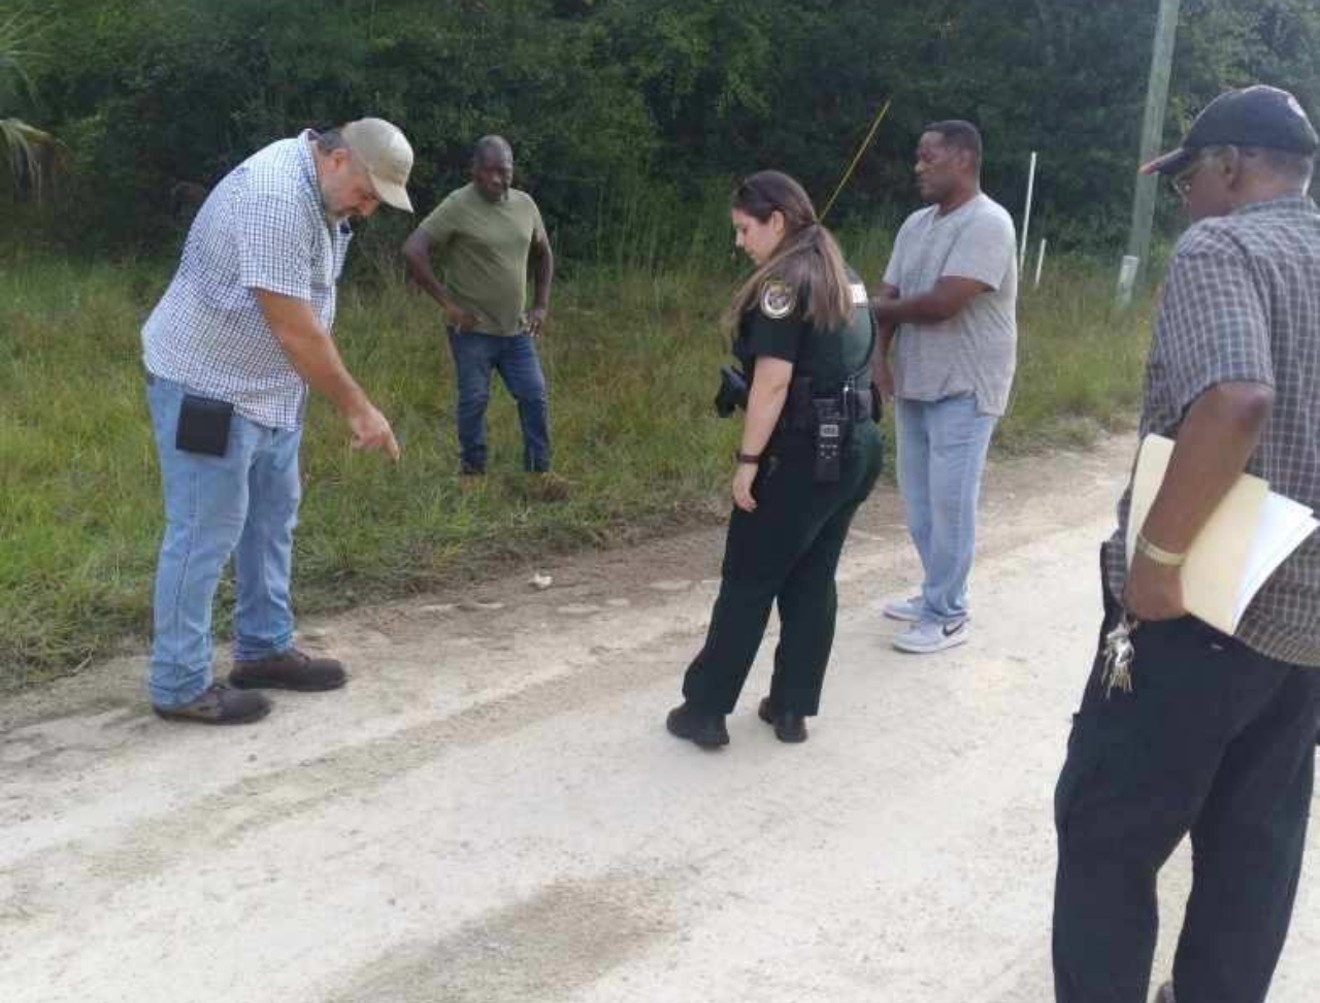 A Levy County Sheriff's deputy at the scene in Rosewood, Florida, where Marvin Dunn says a white neighbor attacked him and his group on September 6, 2022.